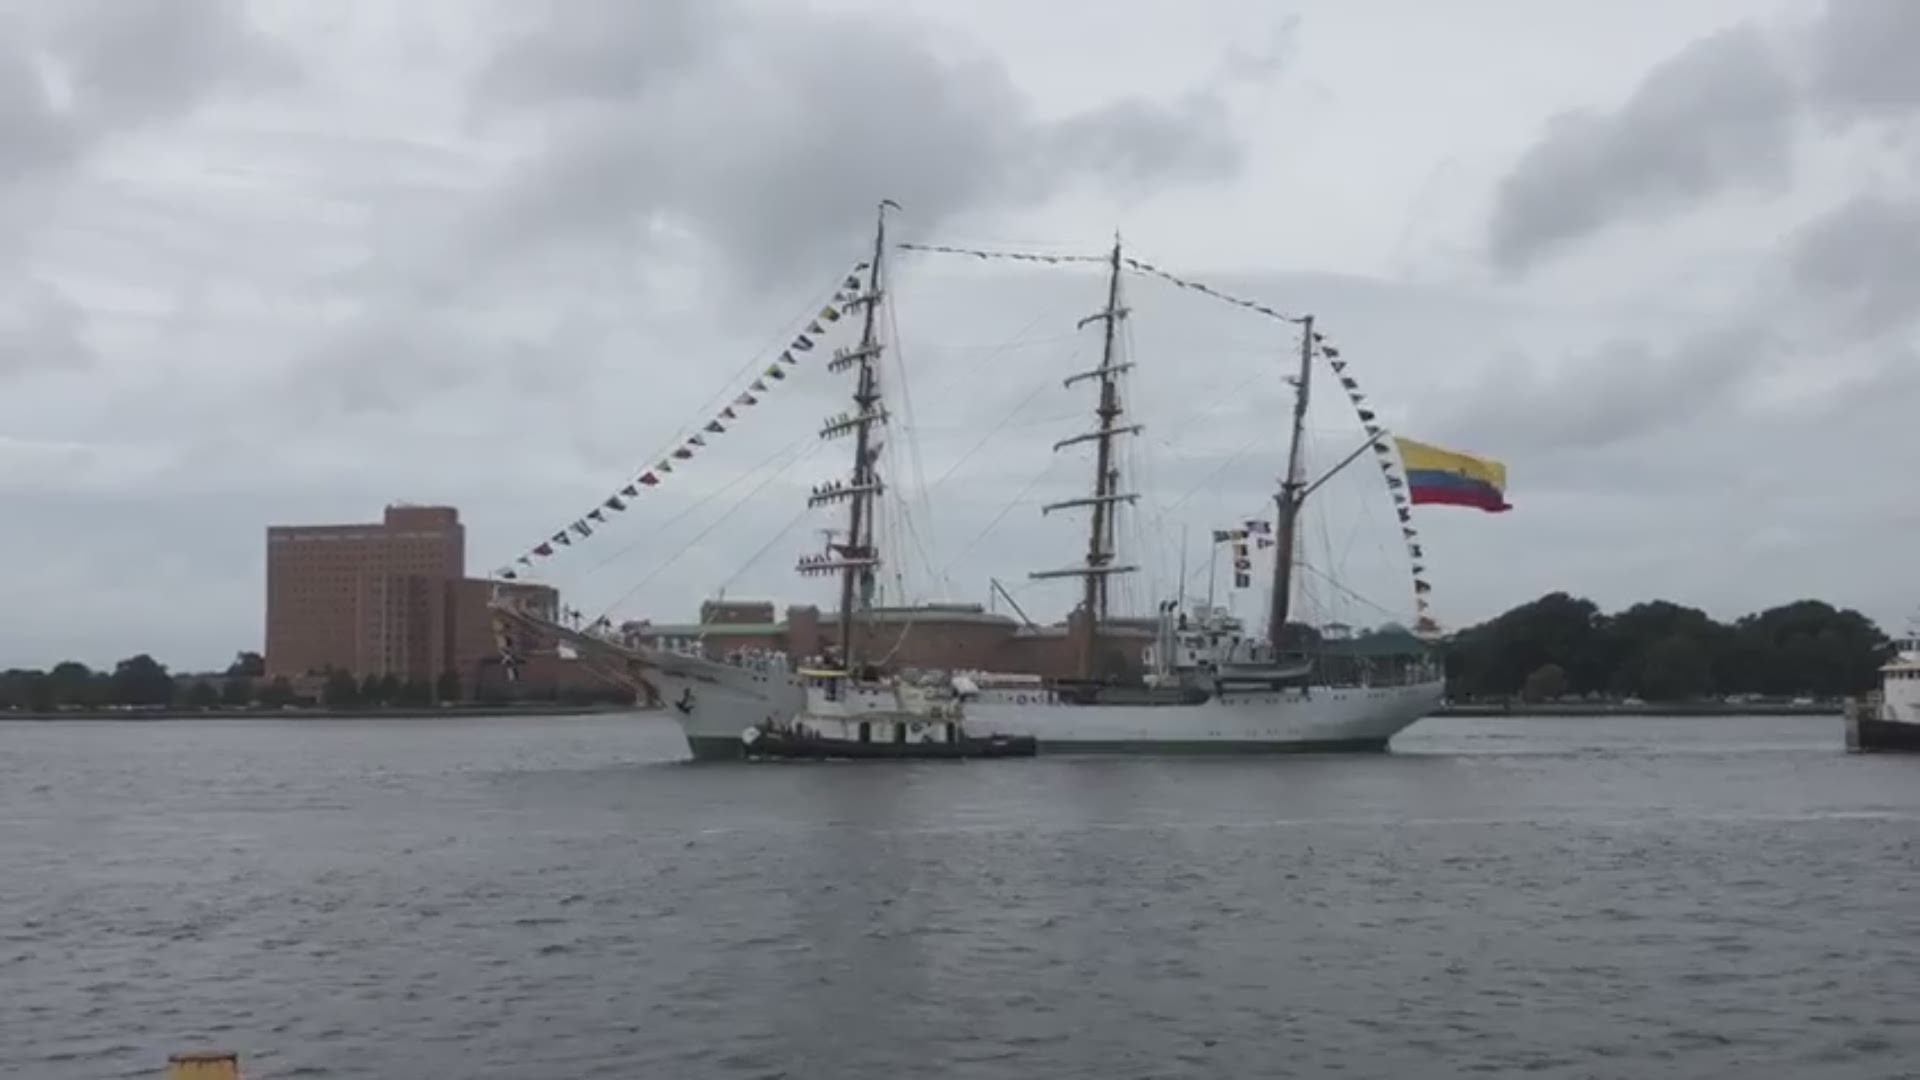 Don Sippel shared video of the Colombian tall ship Arc Gloria pulling into Downtown Norfolk, Va. on September 17, 2018.